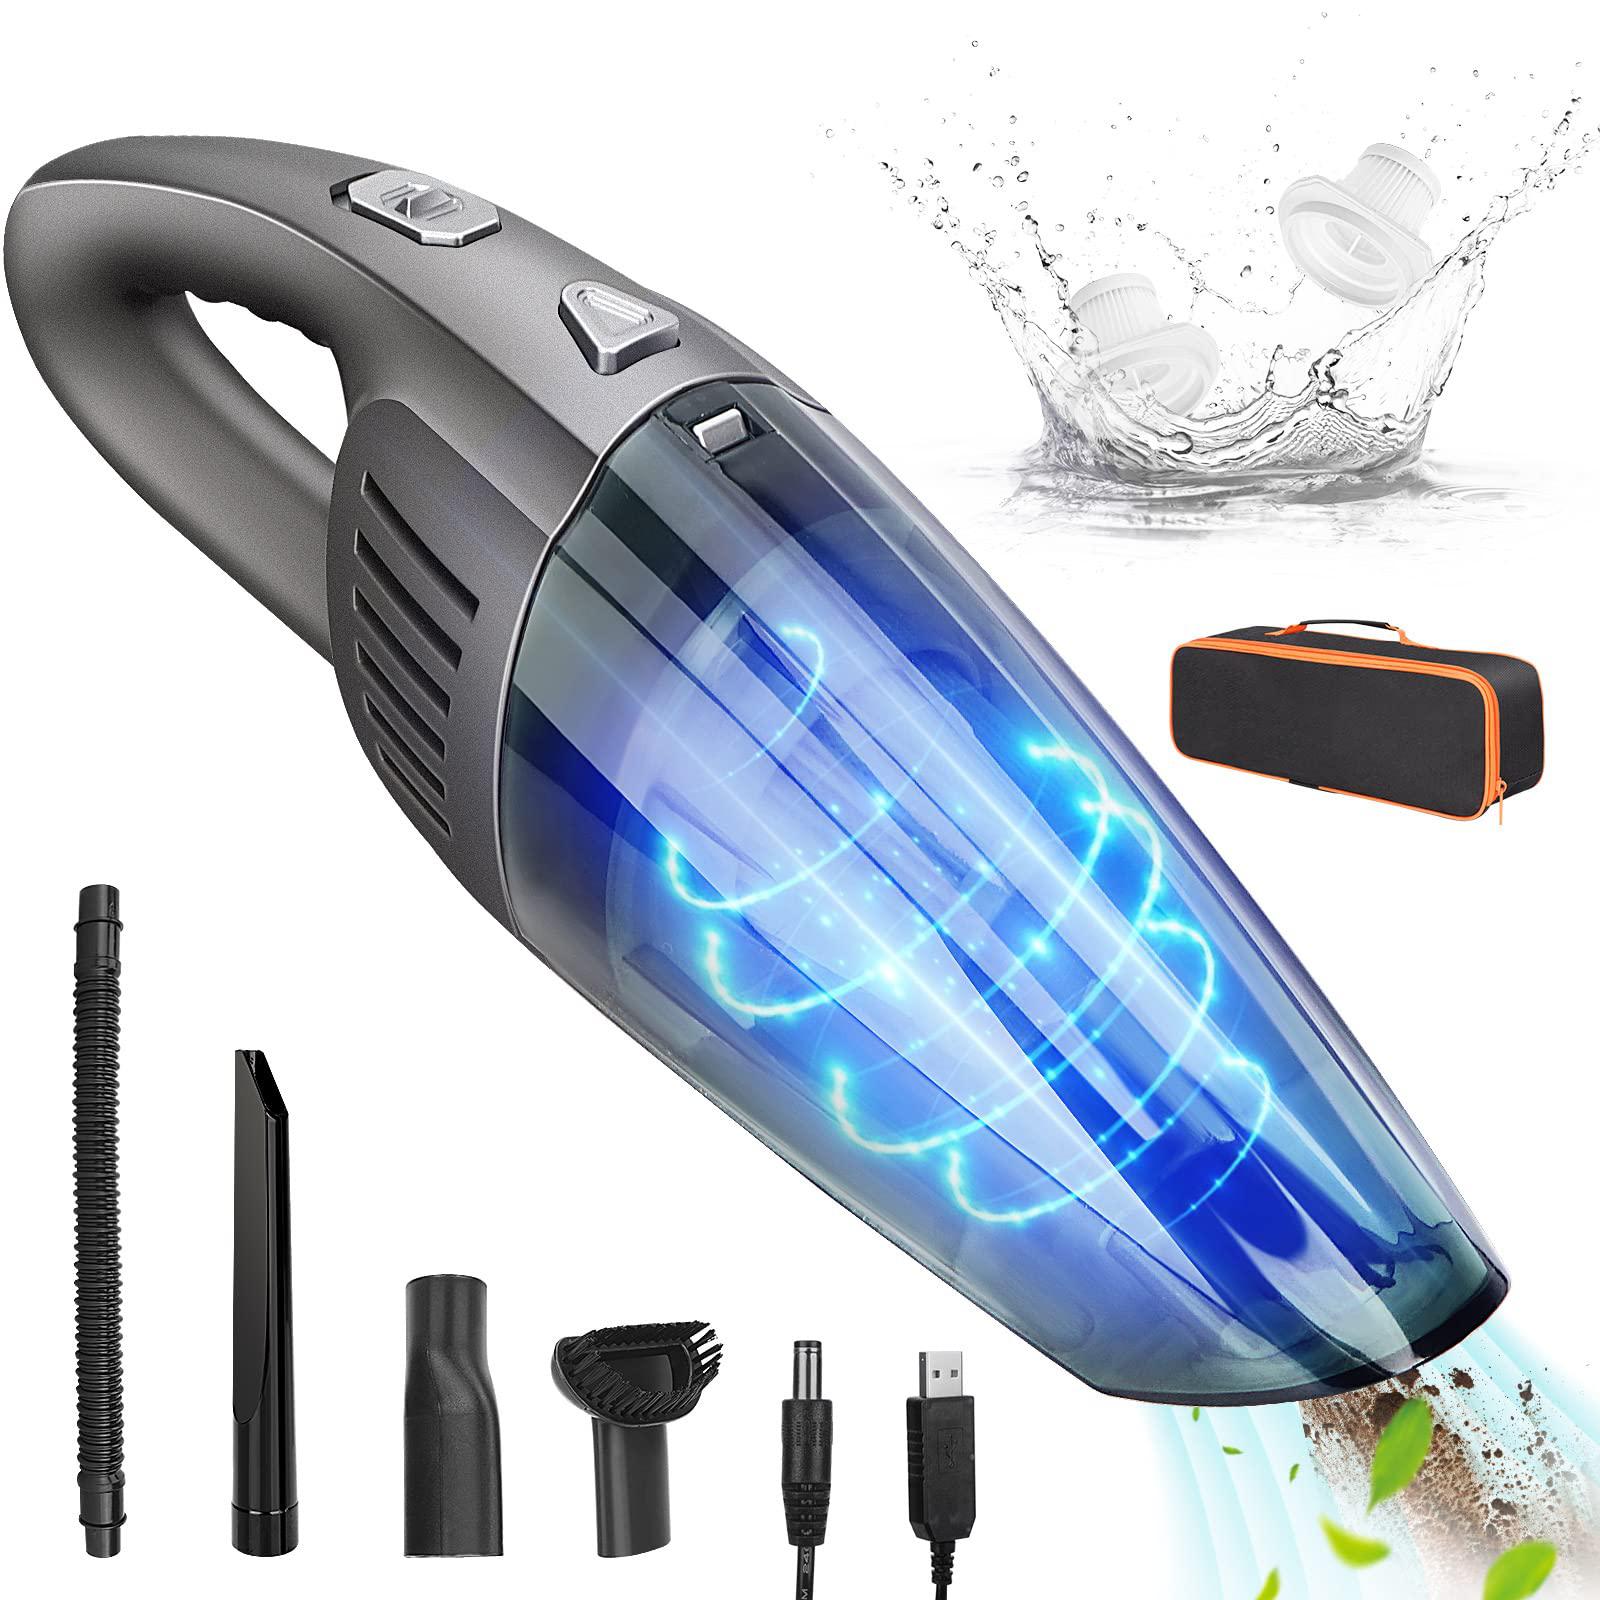 chenxrn handheld vacuum cordless cleaner, wireless rechargeable hand held car vacuum cleaner strong suction 8000pa, portable 